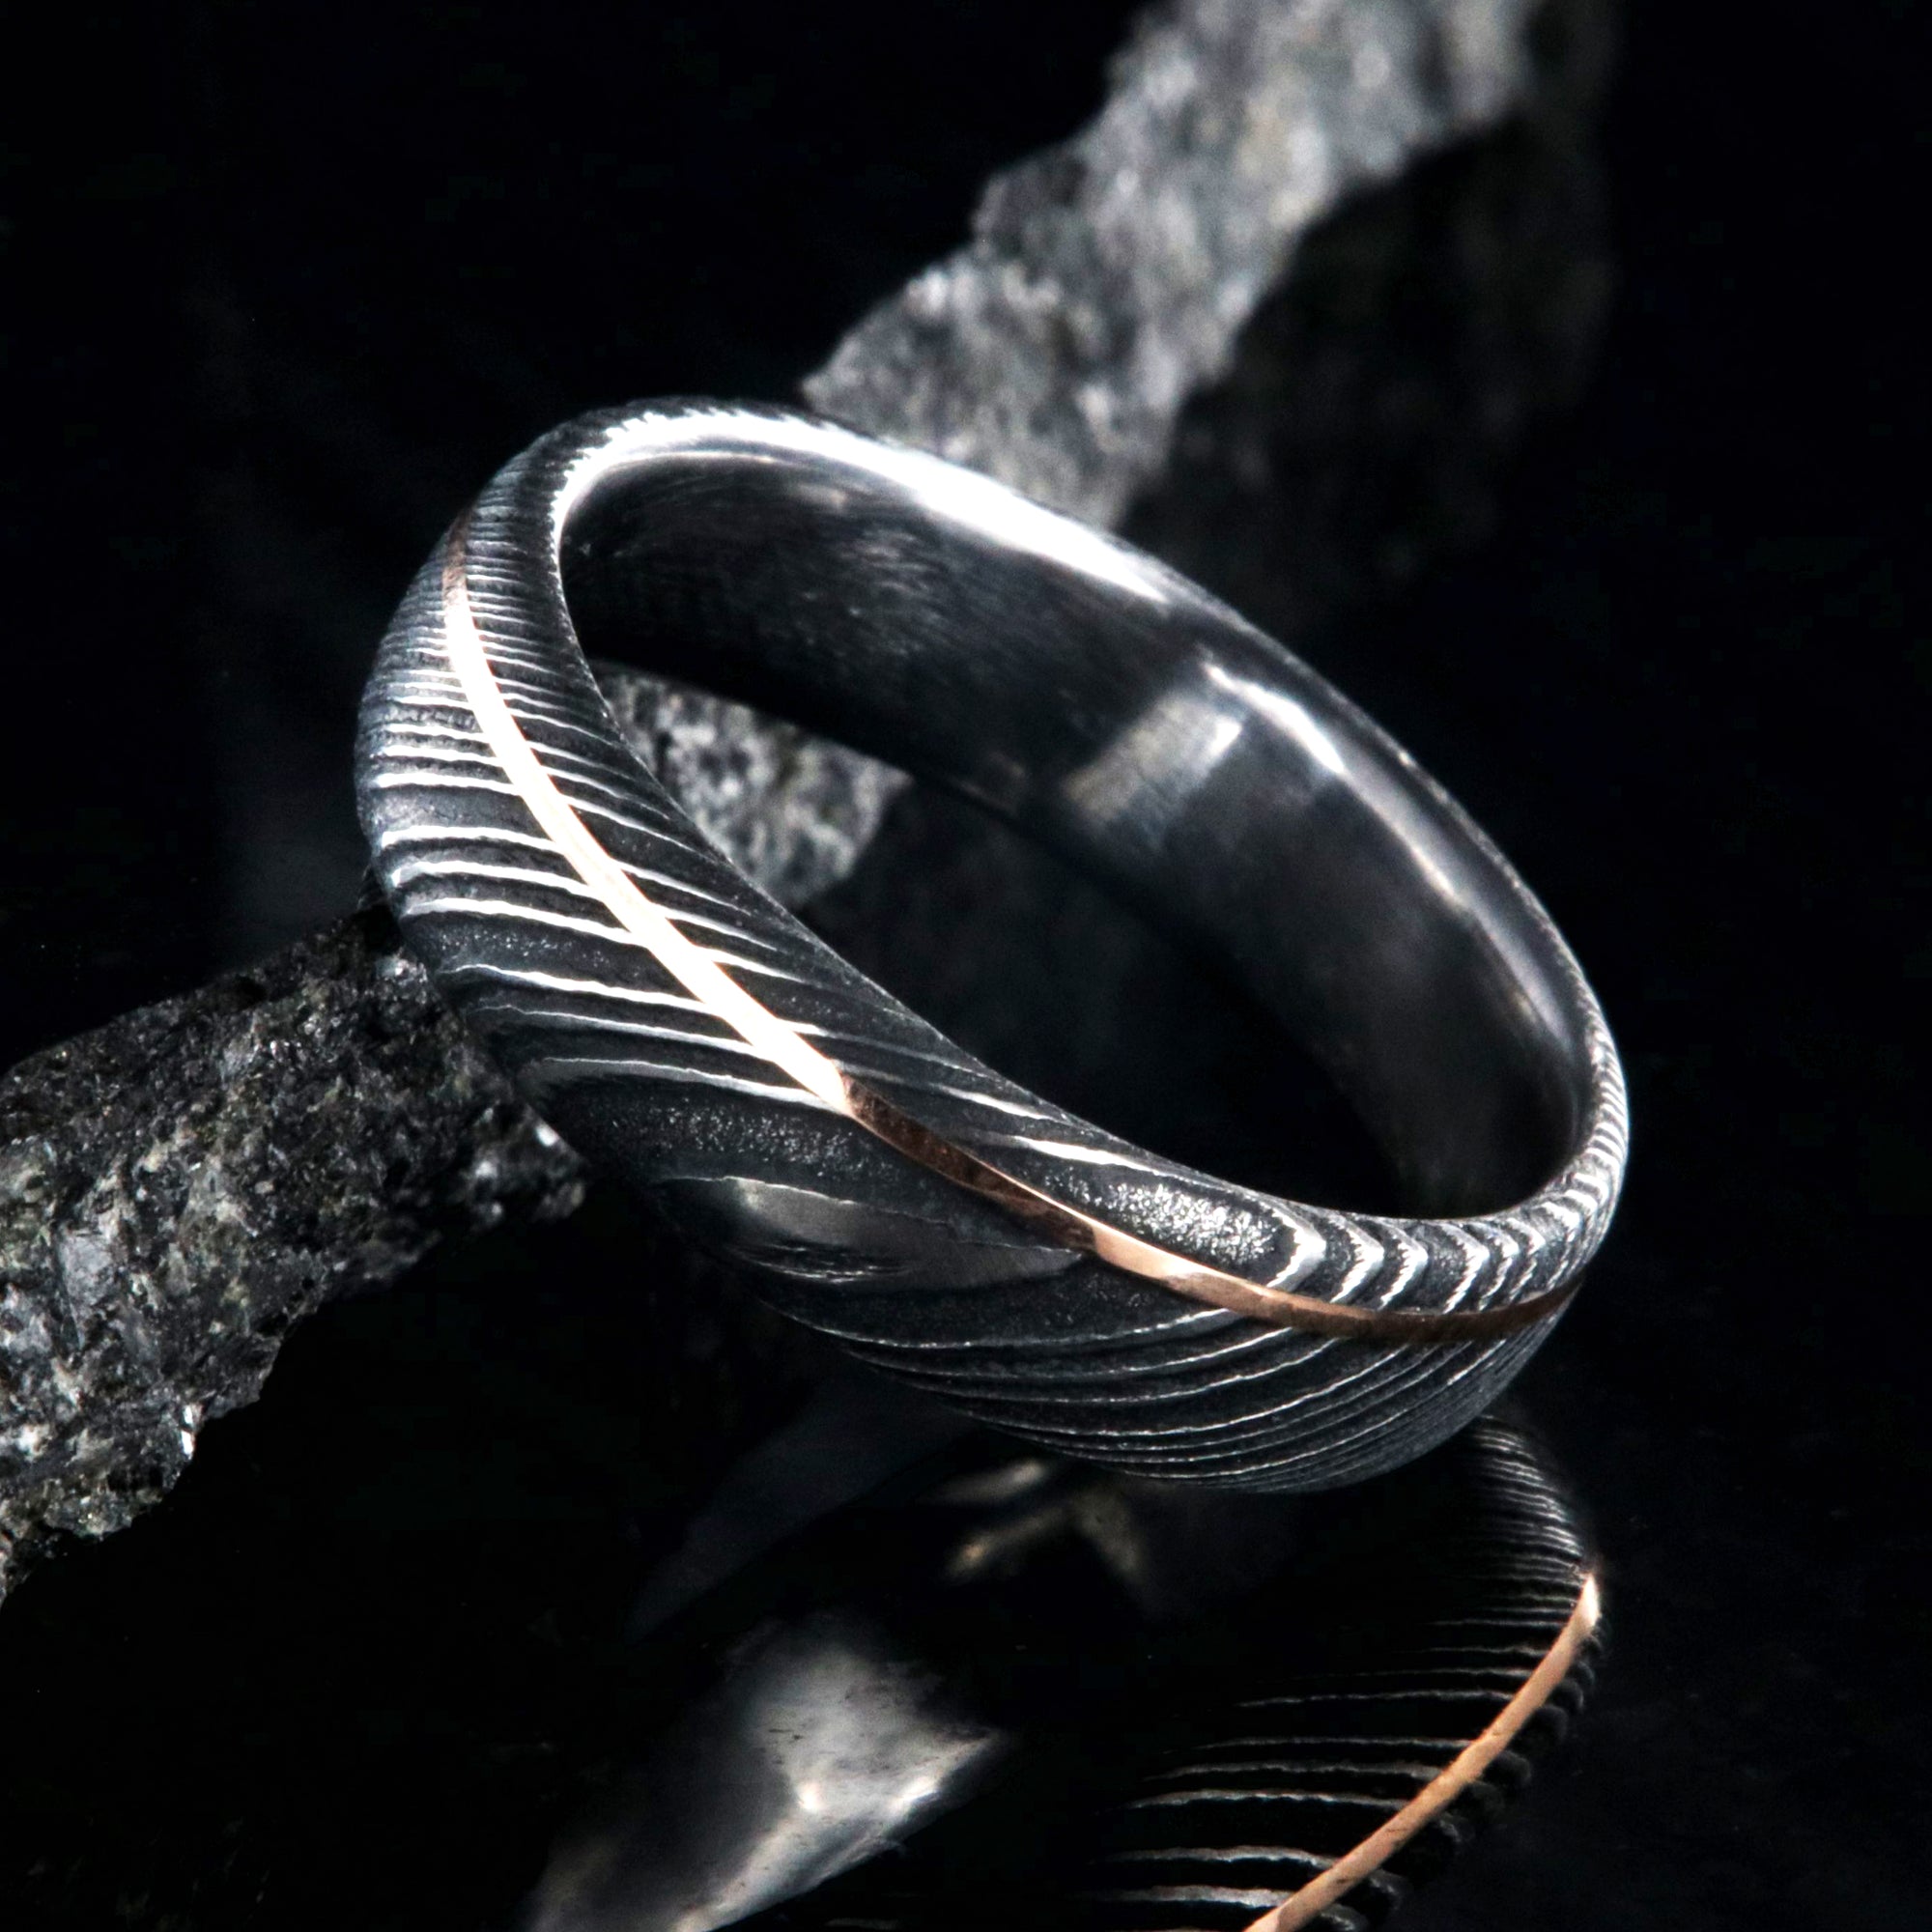 6mm wide black Damascus steel wedding band with rounded profile, polished inside, and ultra-thin off-center rose gold inlay